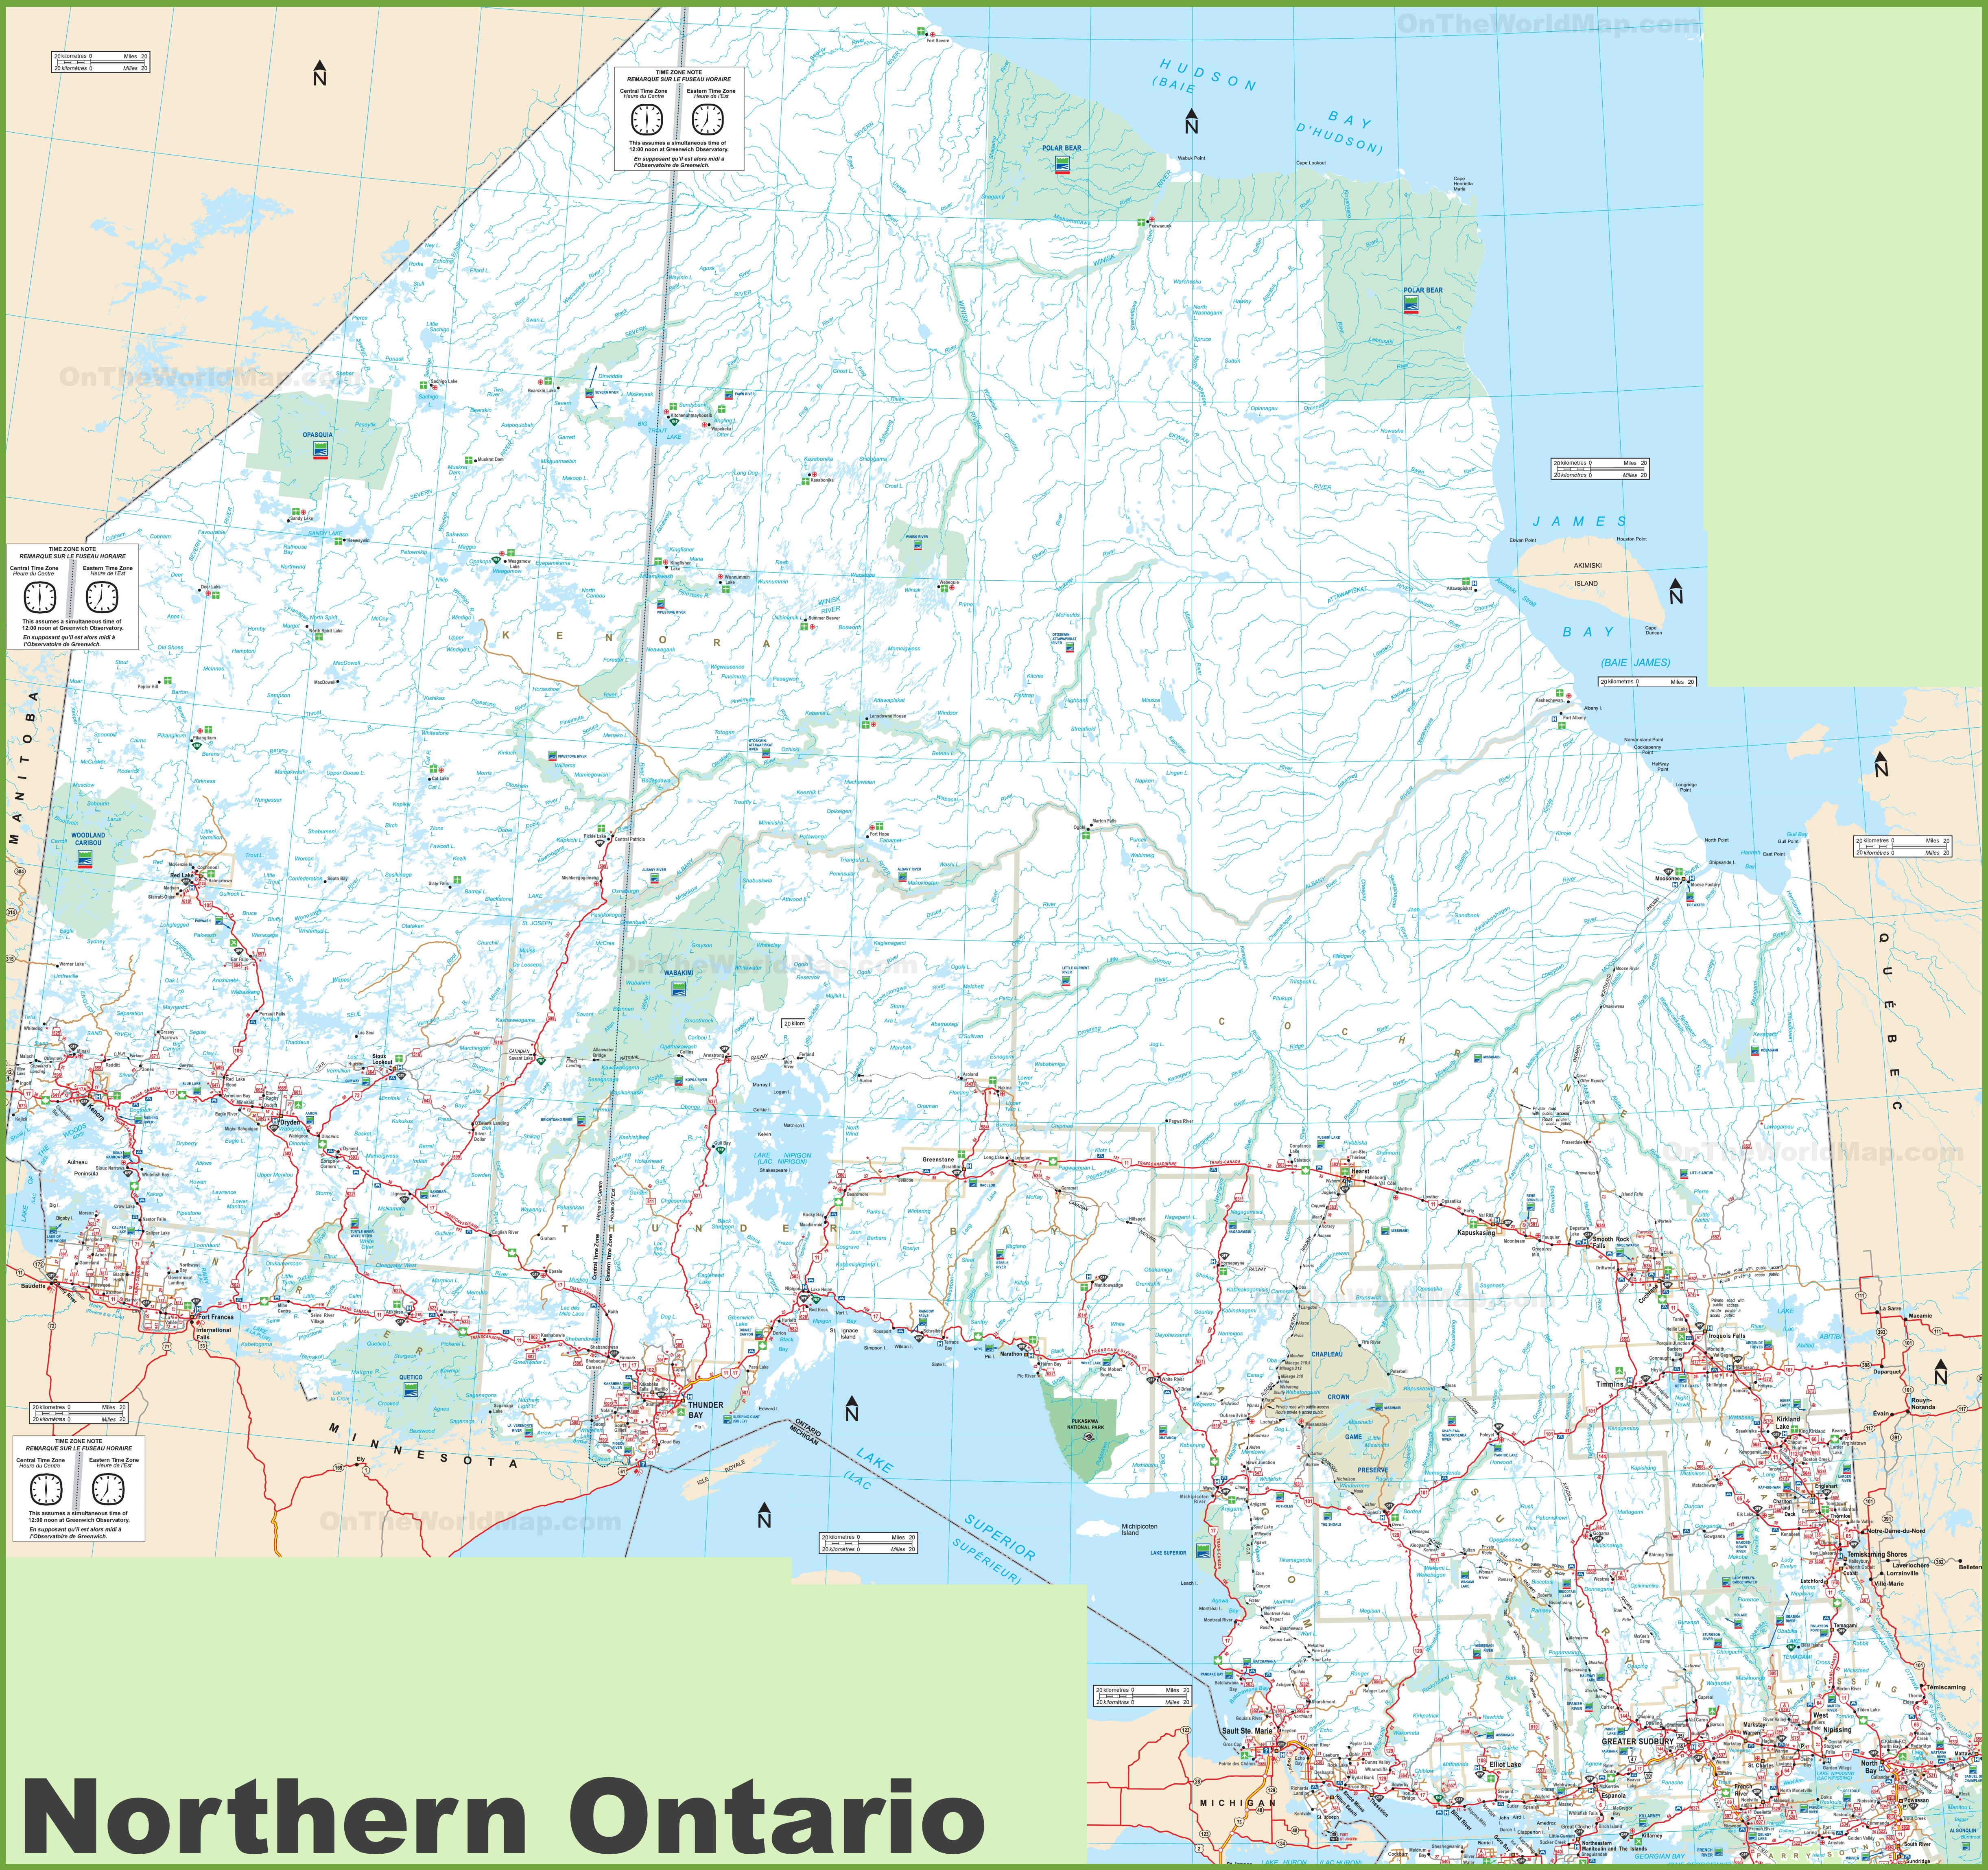 Ontario Province Maps | Canada | Maps Of Ontario (On, Ont) - Free Printable Map Of Ontario